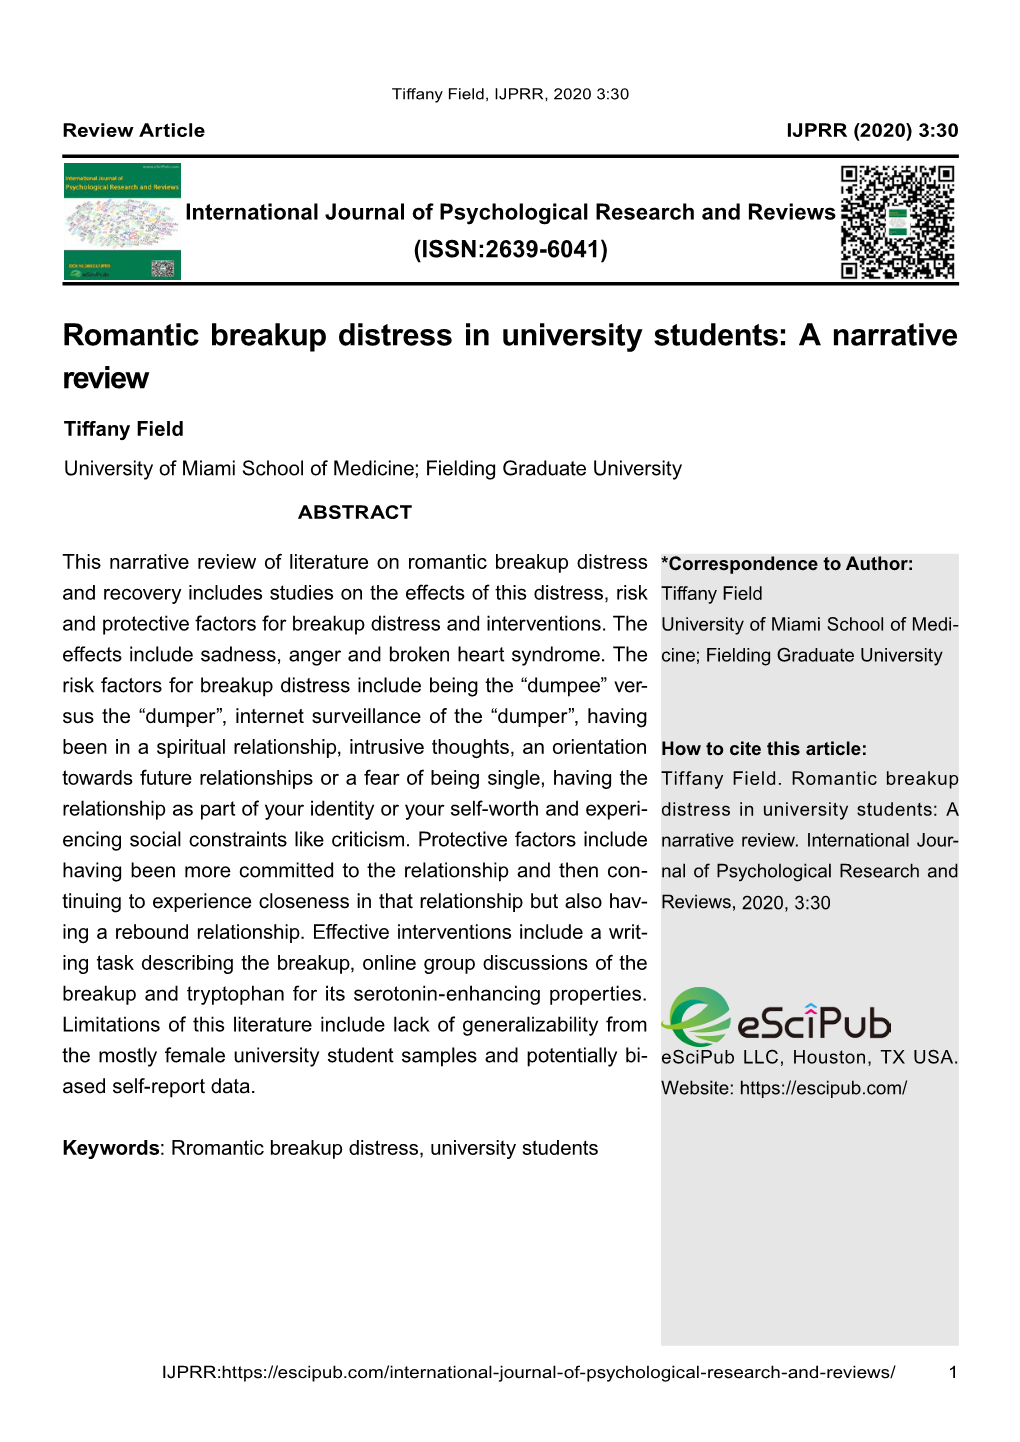 Romantic Breakup Distress in University Students: a Narrative Review